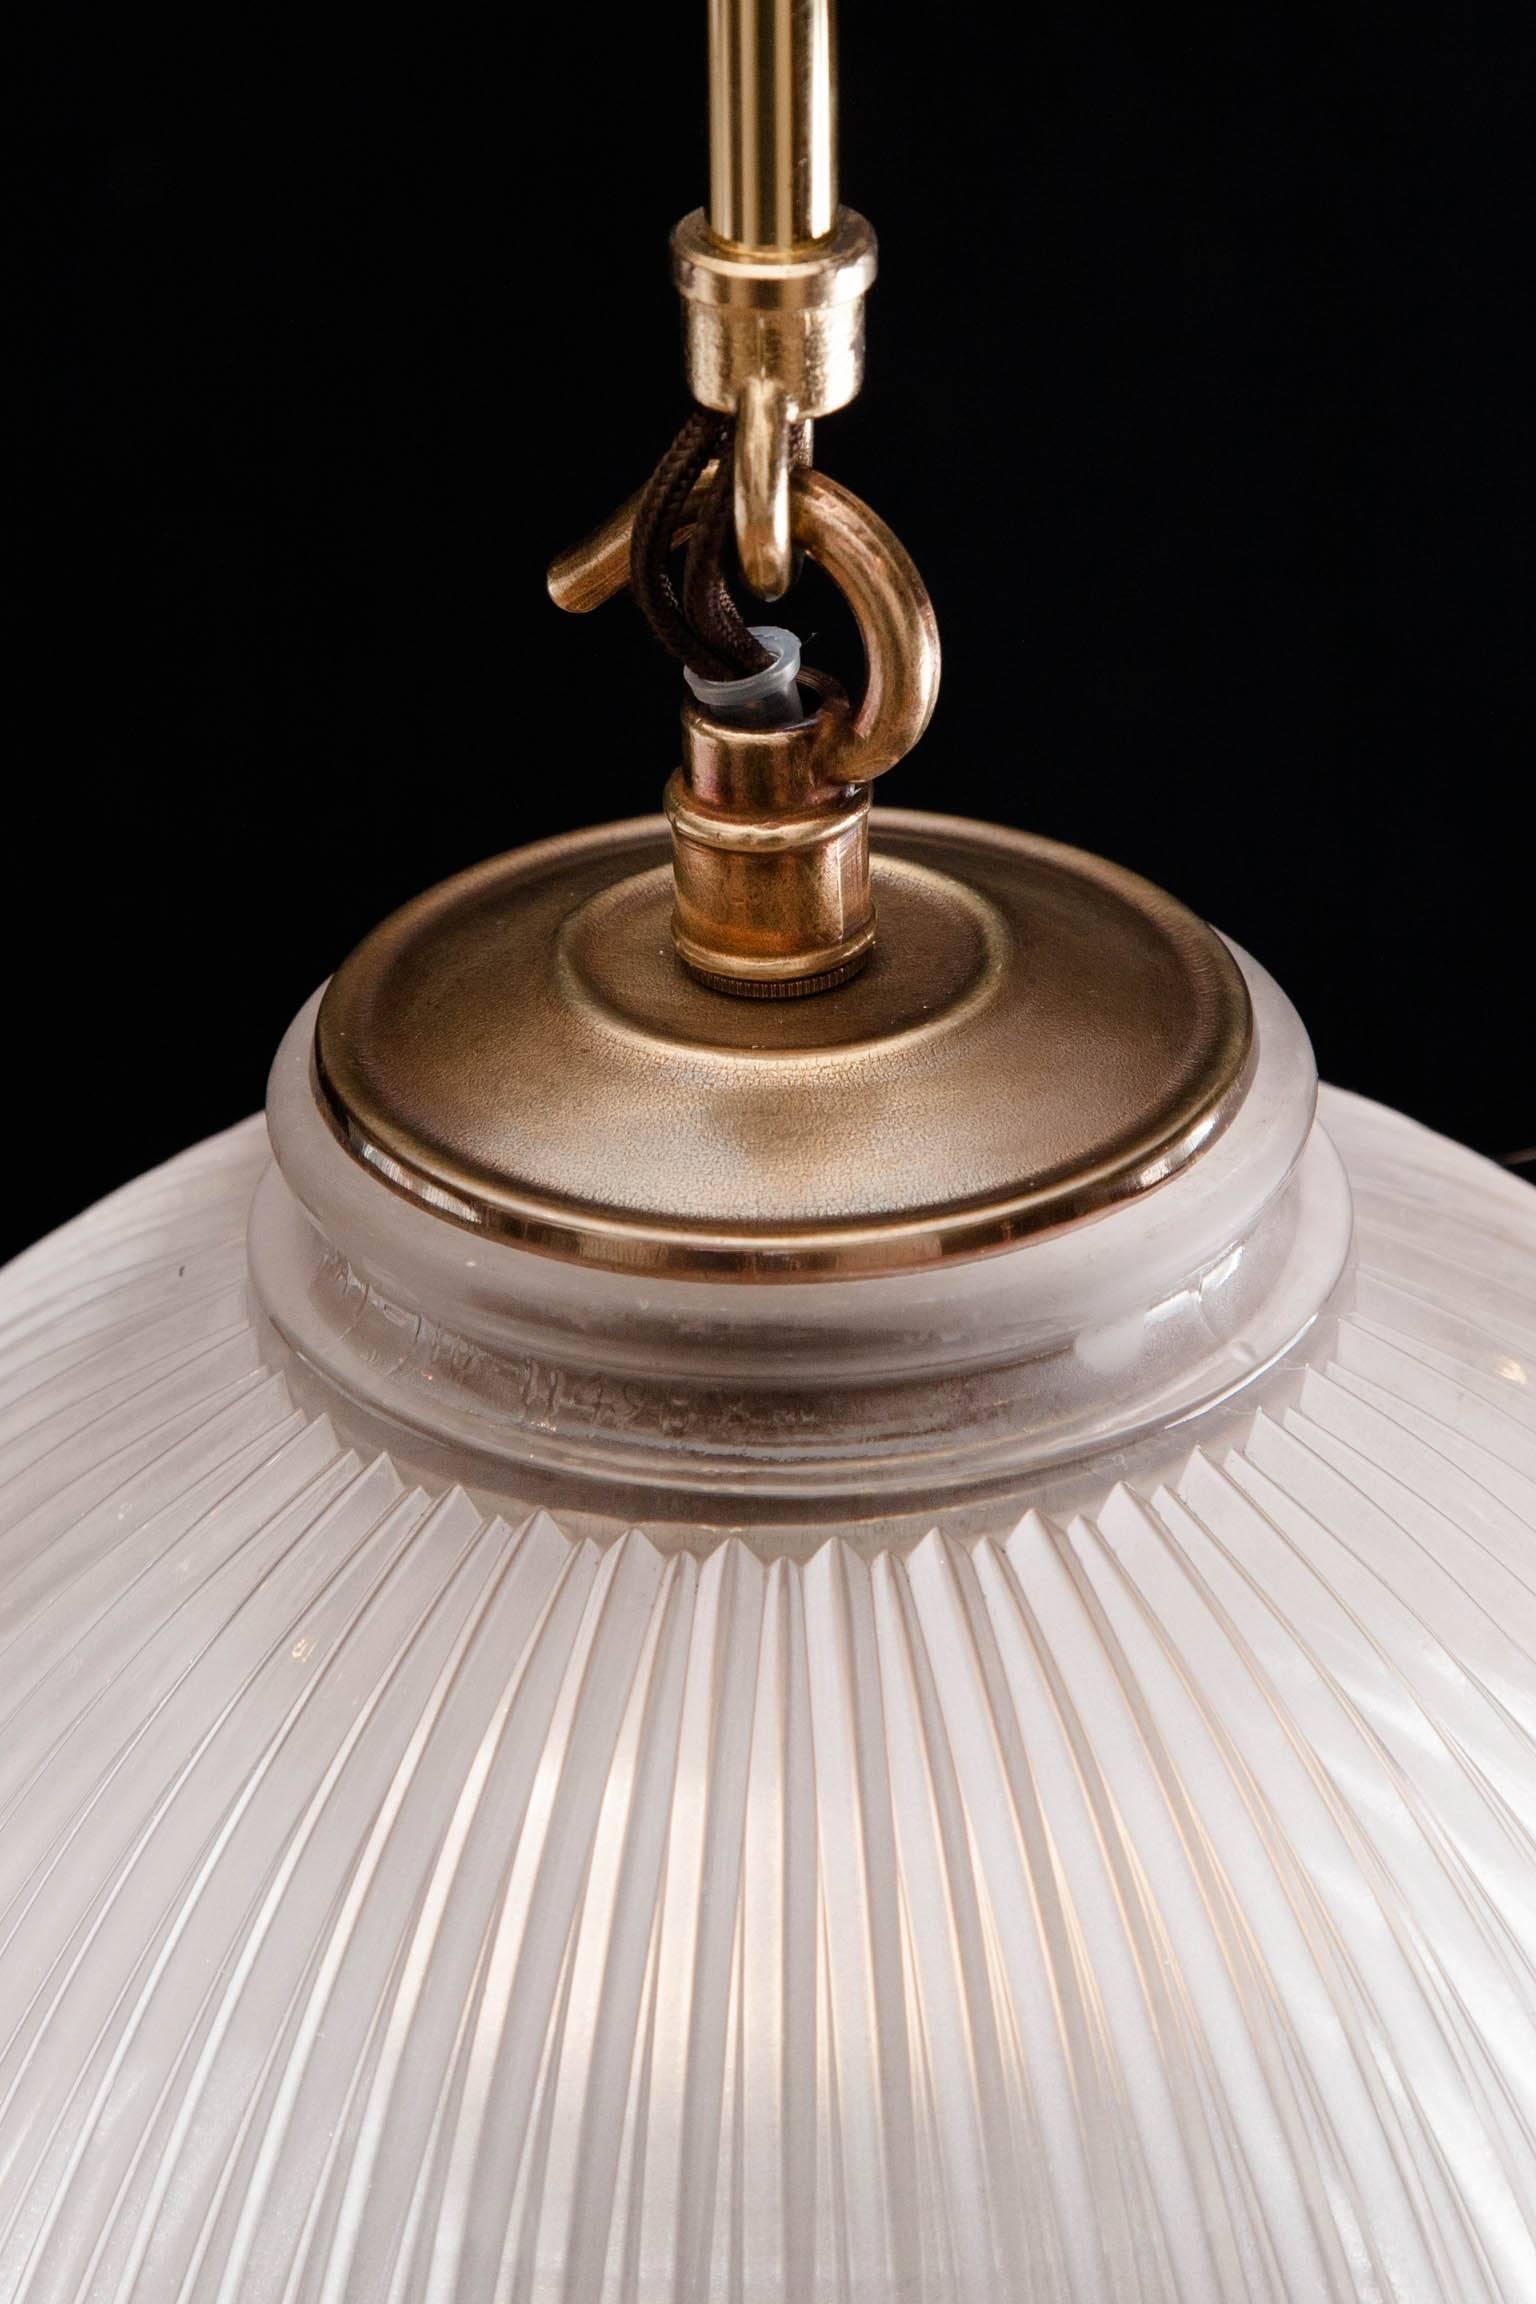 Four Early 20th Century English Holophane Dish Lights with Antiqued Brass Mounts For Sale 3